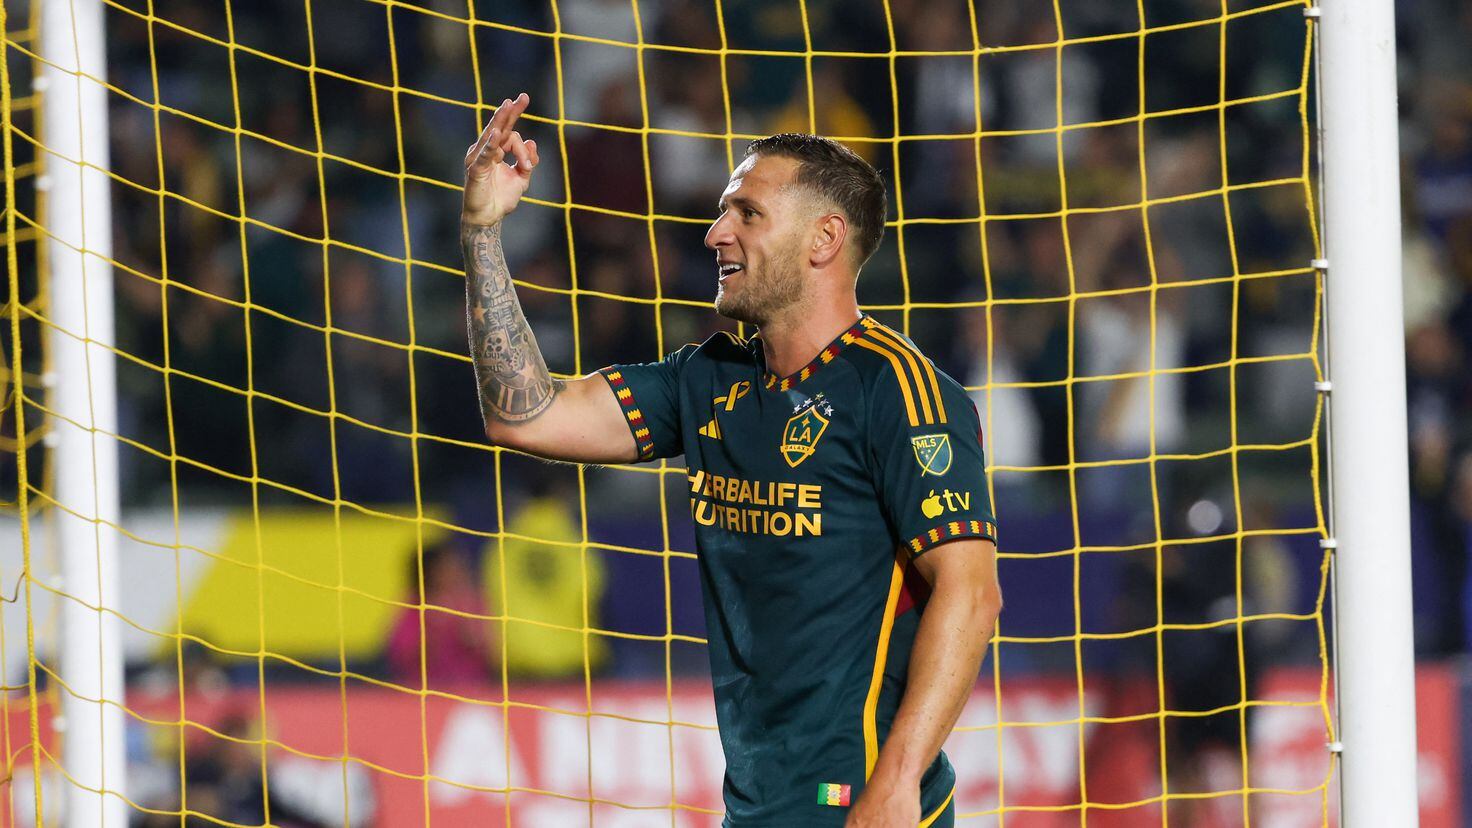 Can LA Galaxy make the playoffs after comeback win over Minnesota? AS USA